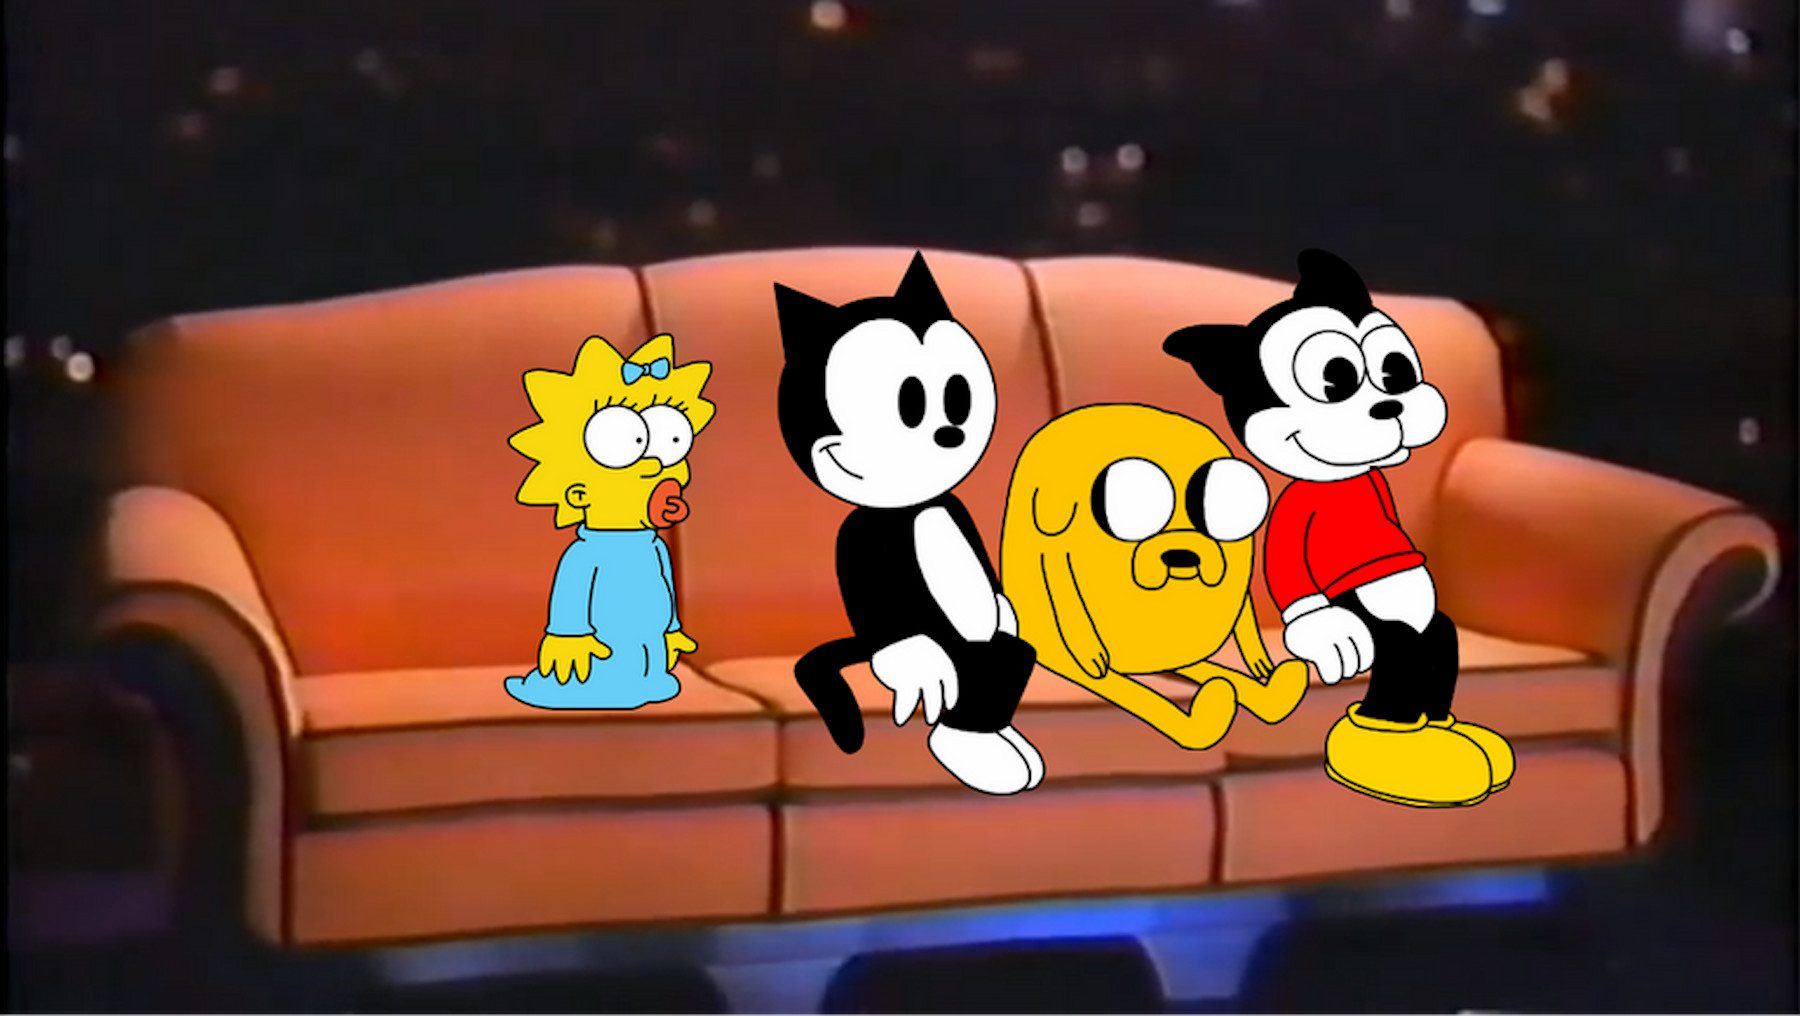 Maggie Simpsons sitting on couch with Felix and Jake from Adventure Time.